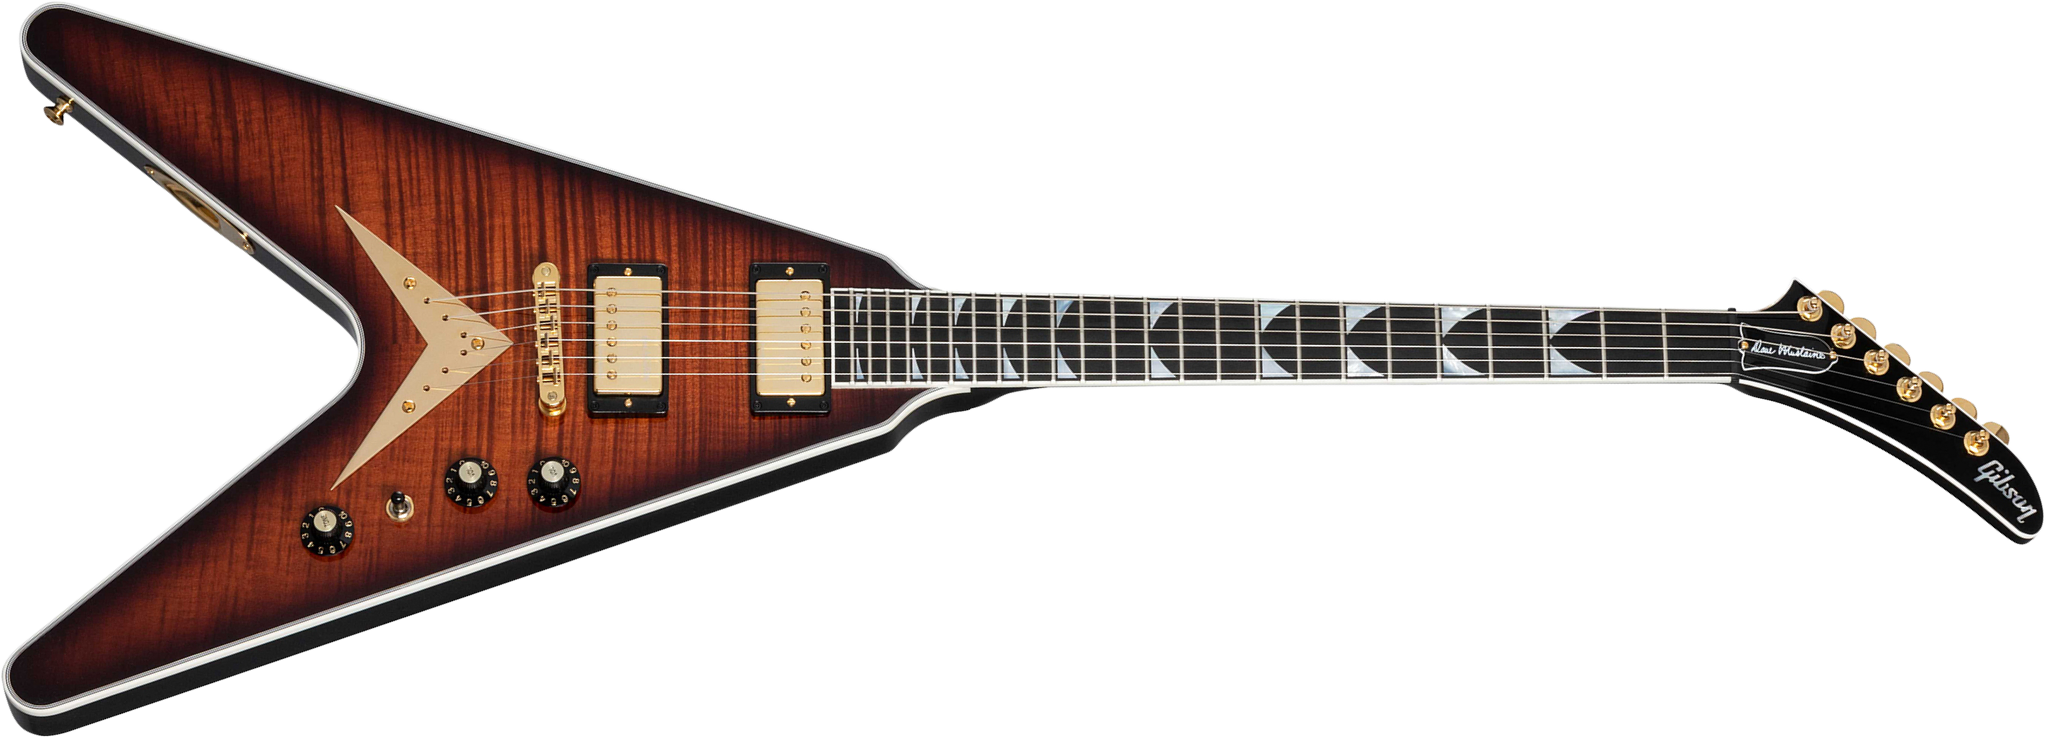 Gibson Custom Shop Dave Mustaine Flying V Exp Ltd Signature 2h Ht Eb - Red Amber Burst - E-Gitarre aus Metall - Main picture